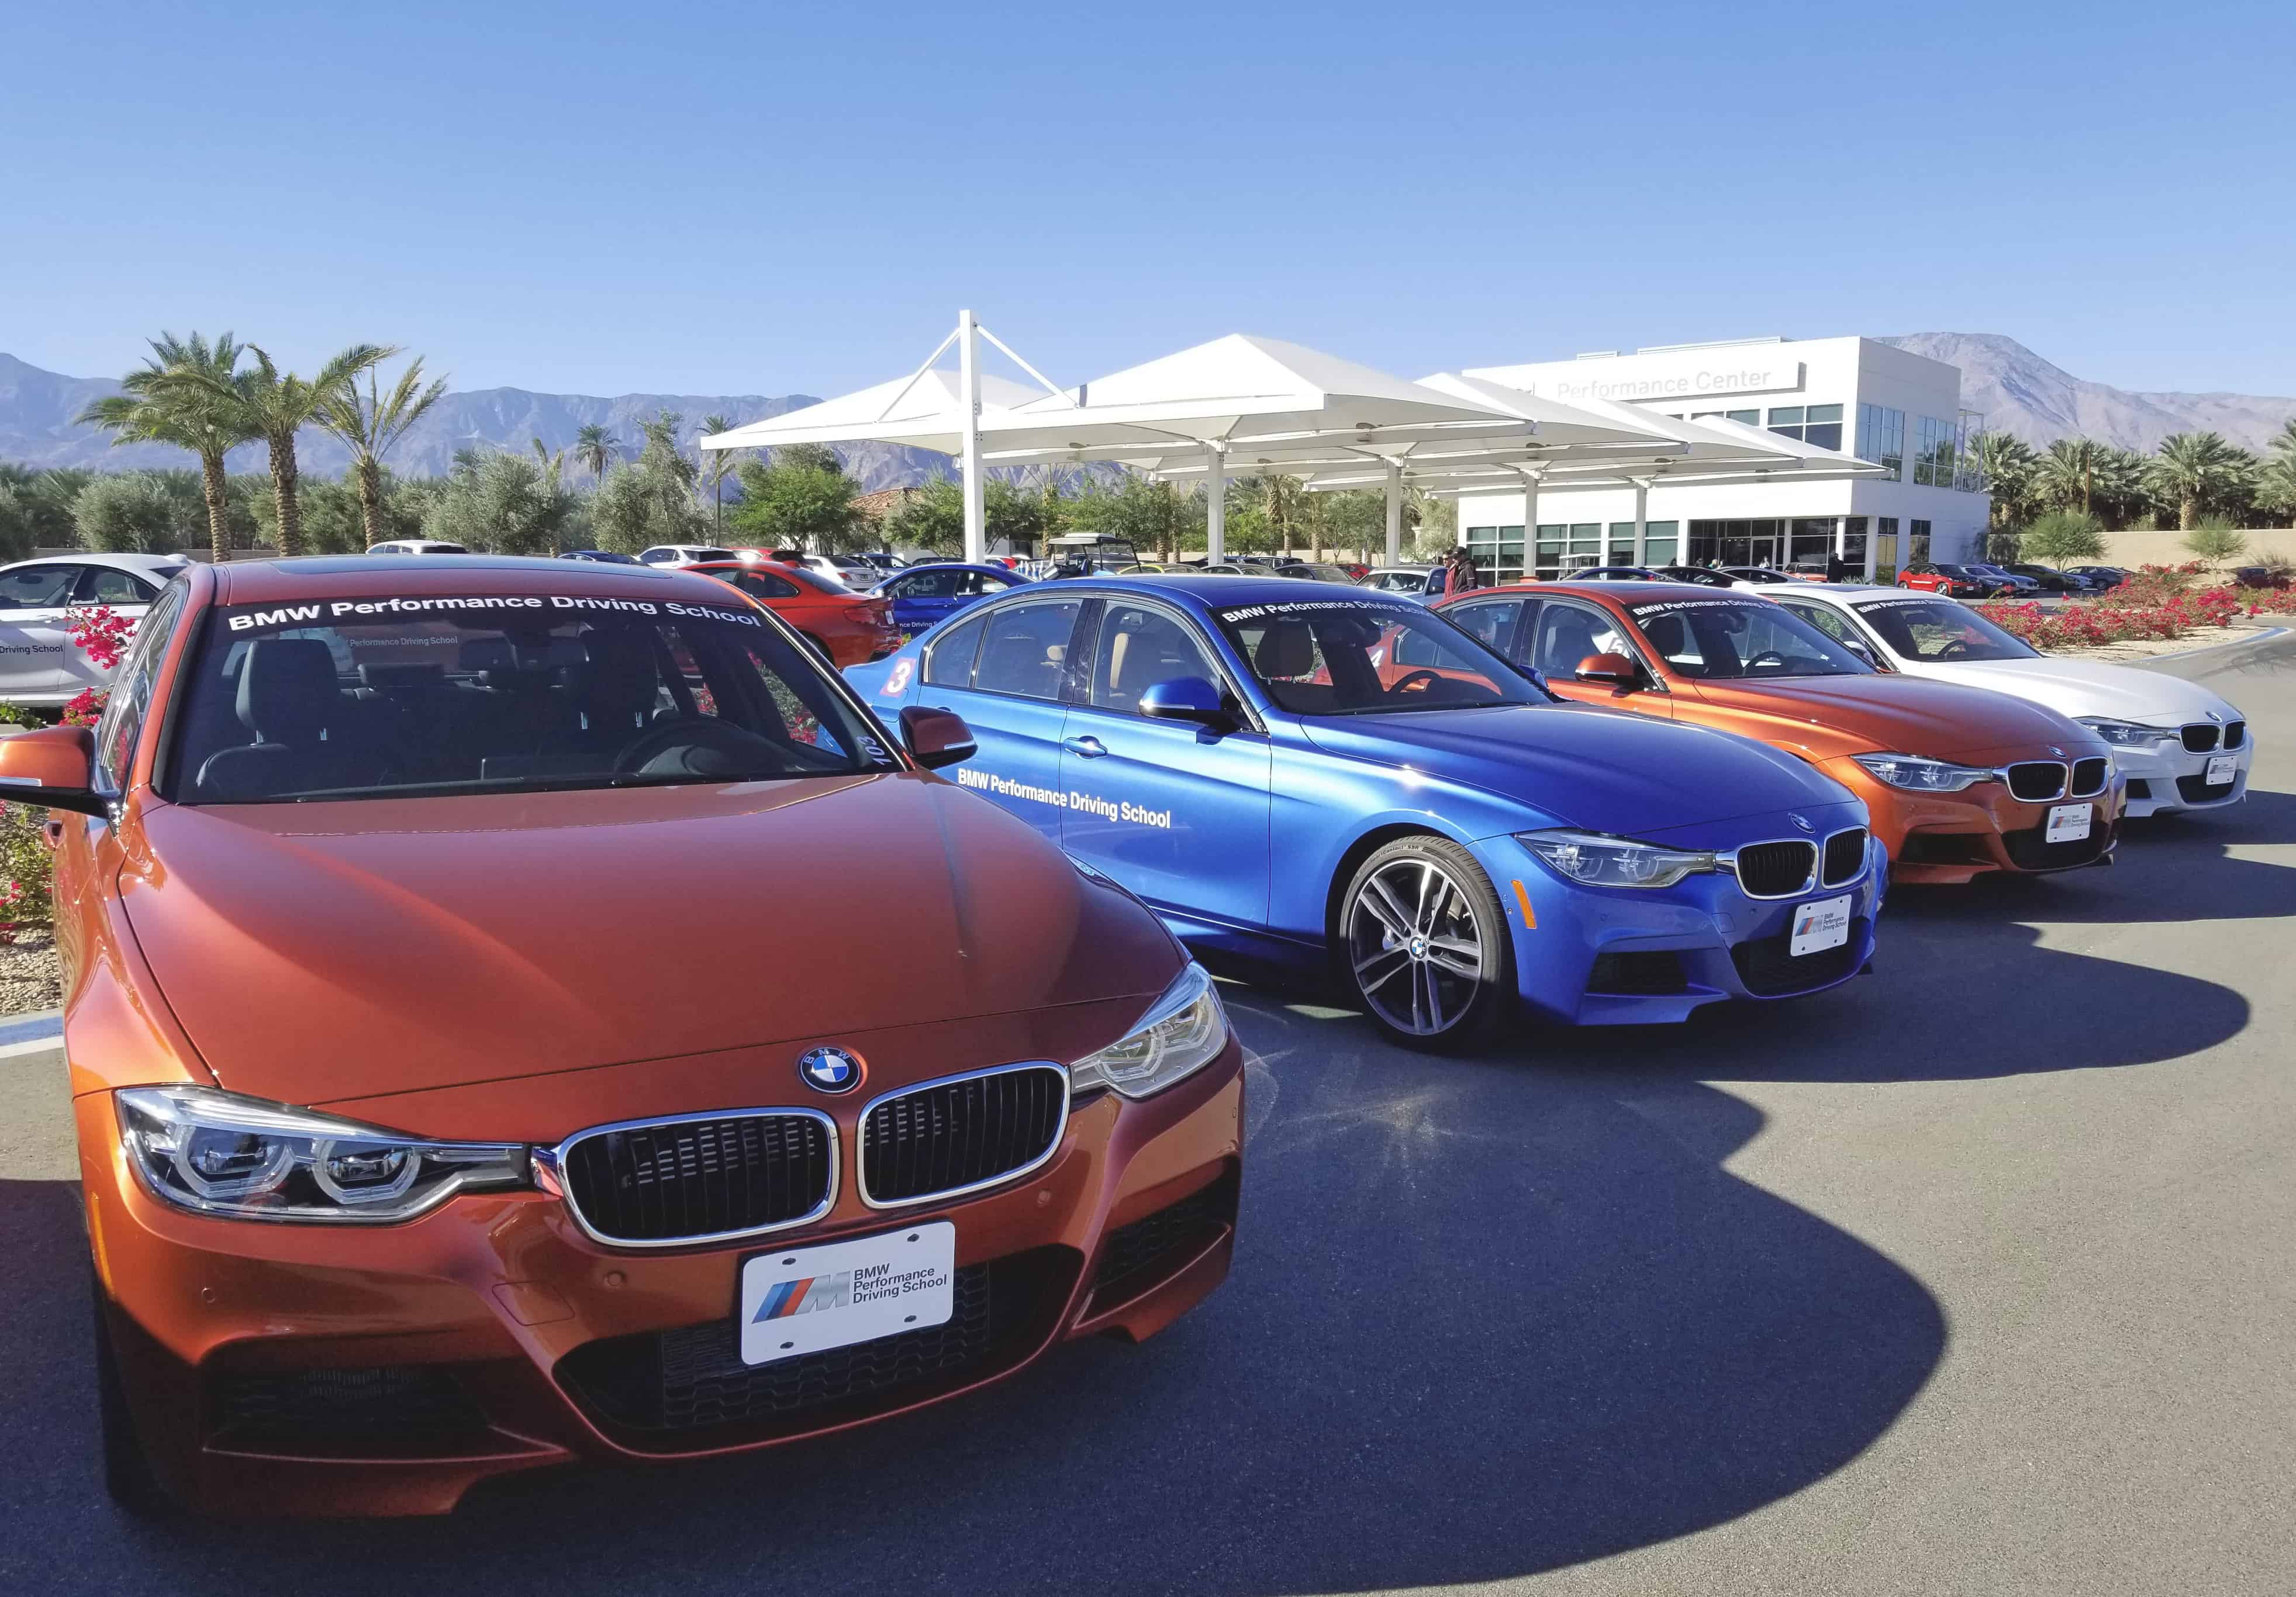 Improve Driving Skills and Drive FAST Cars at the BMW Performance Training Center